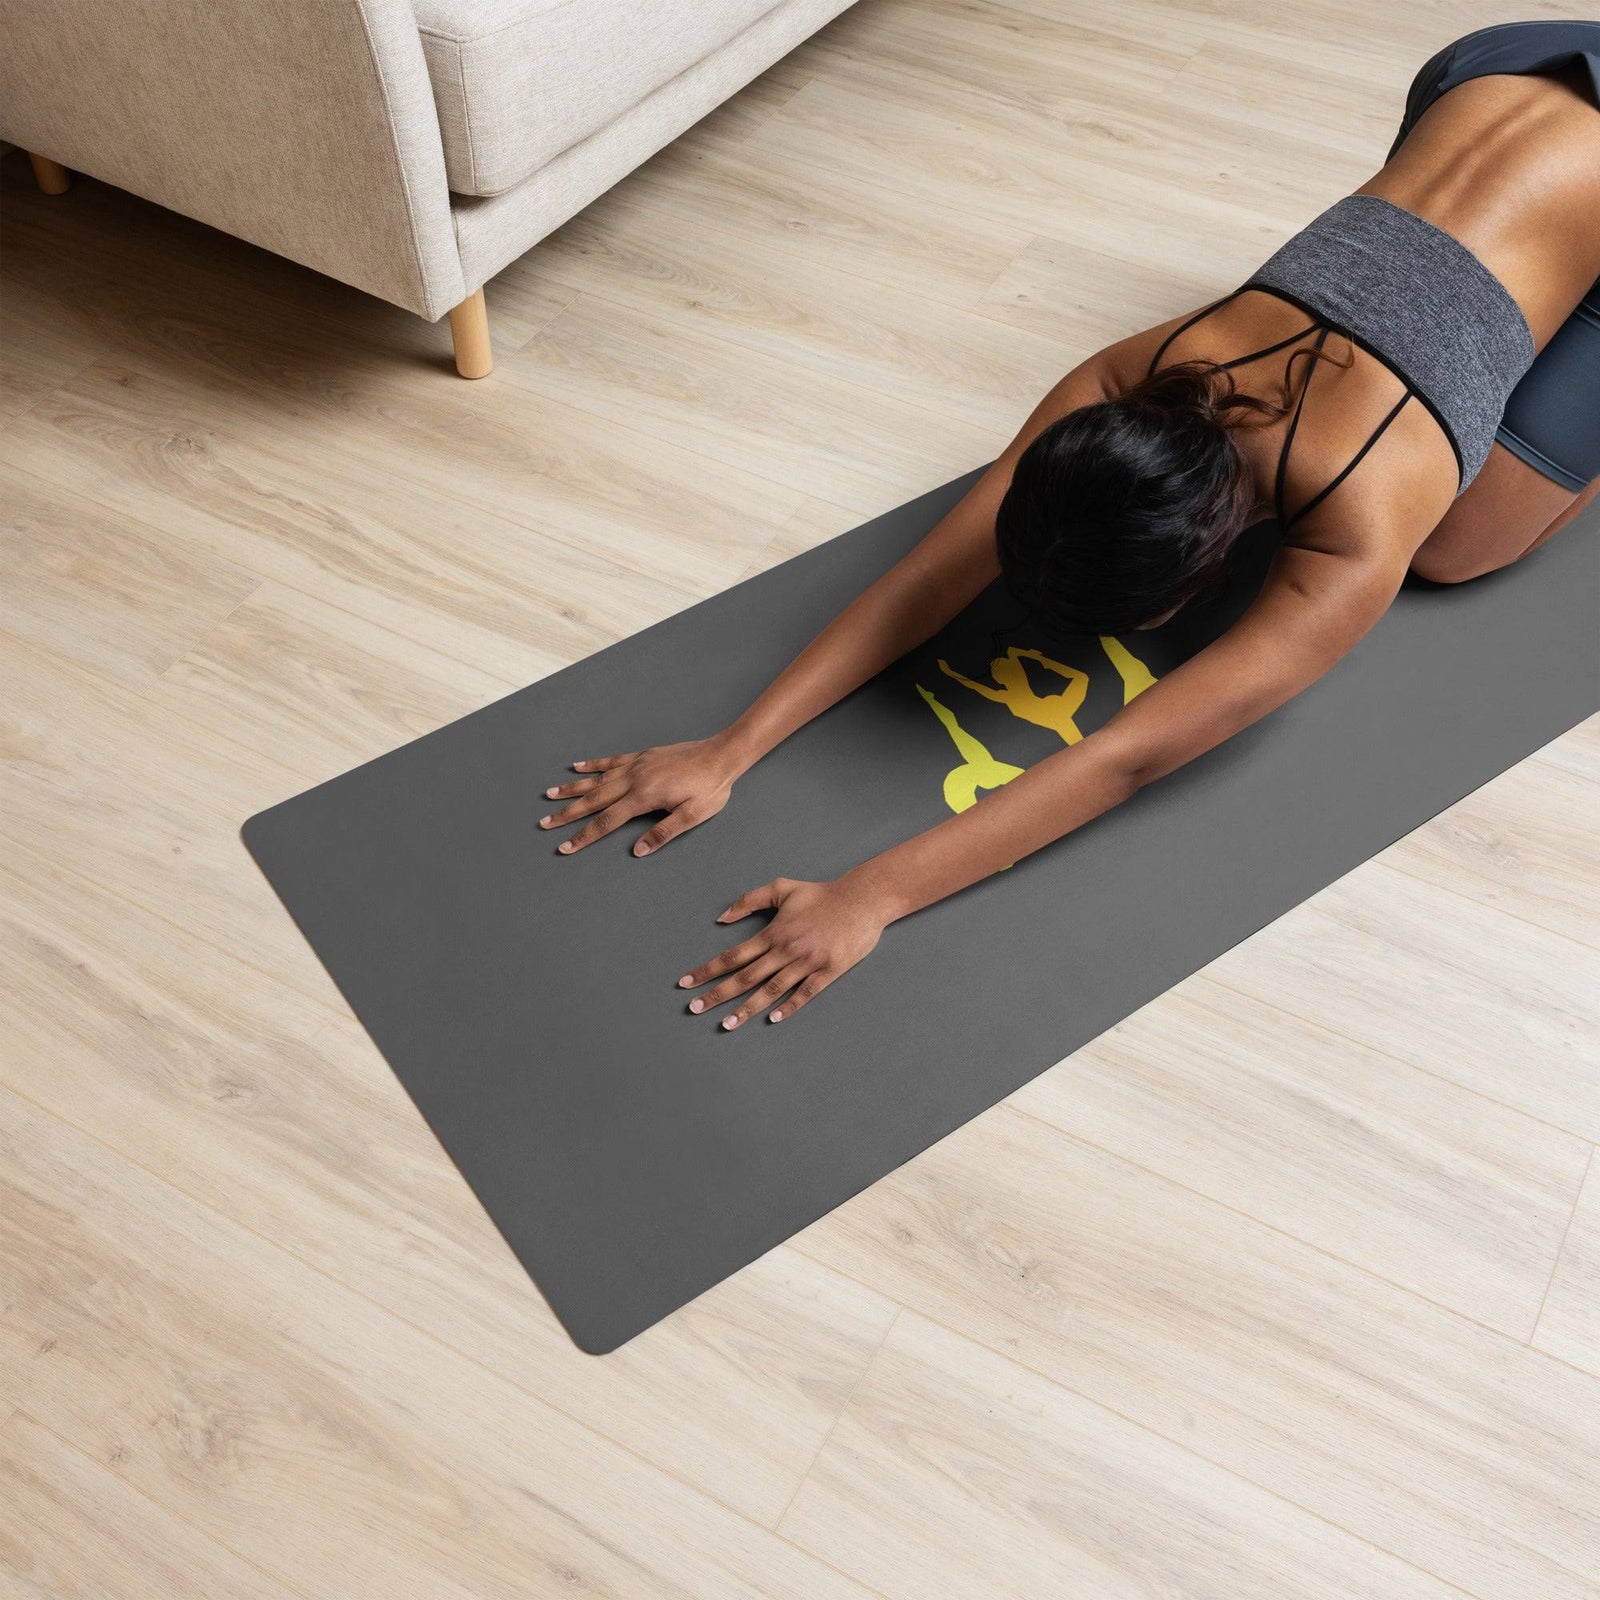 Yoga Mats Anti Slip Surface with Added Carry Handle - Revive Wear     Shop our selection of Revive Wear yoga mats crafted with added cushioning and support. Features an anti-slip surface and a convenient carry handle. Perfect for yoga and stretching!